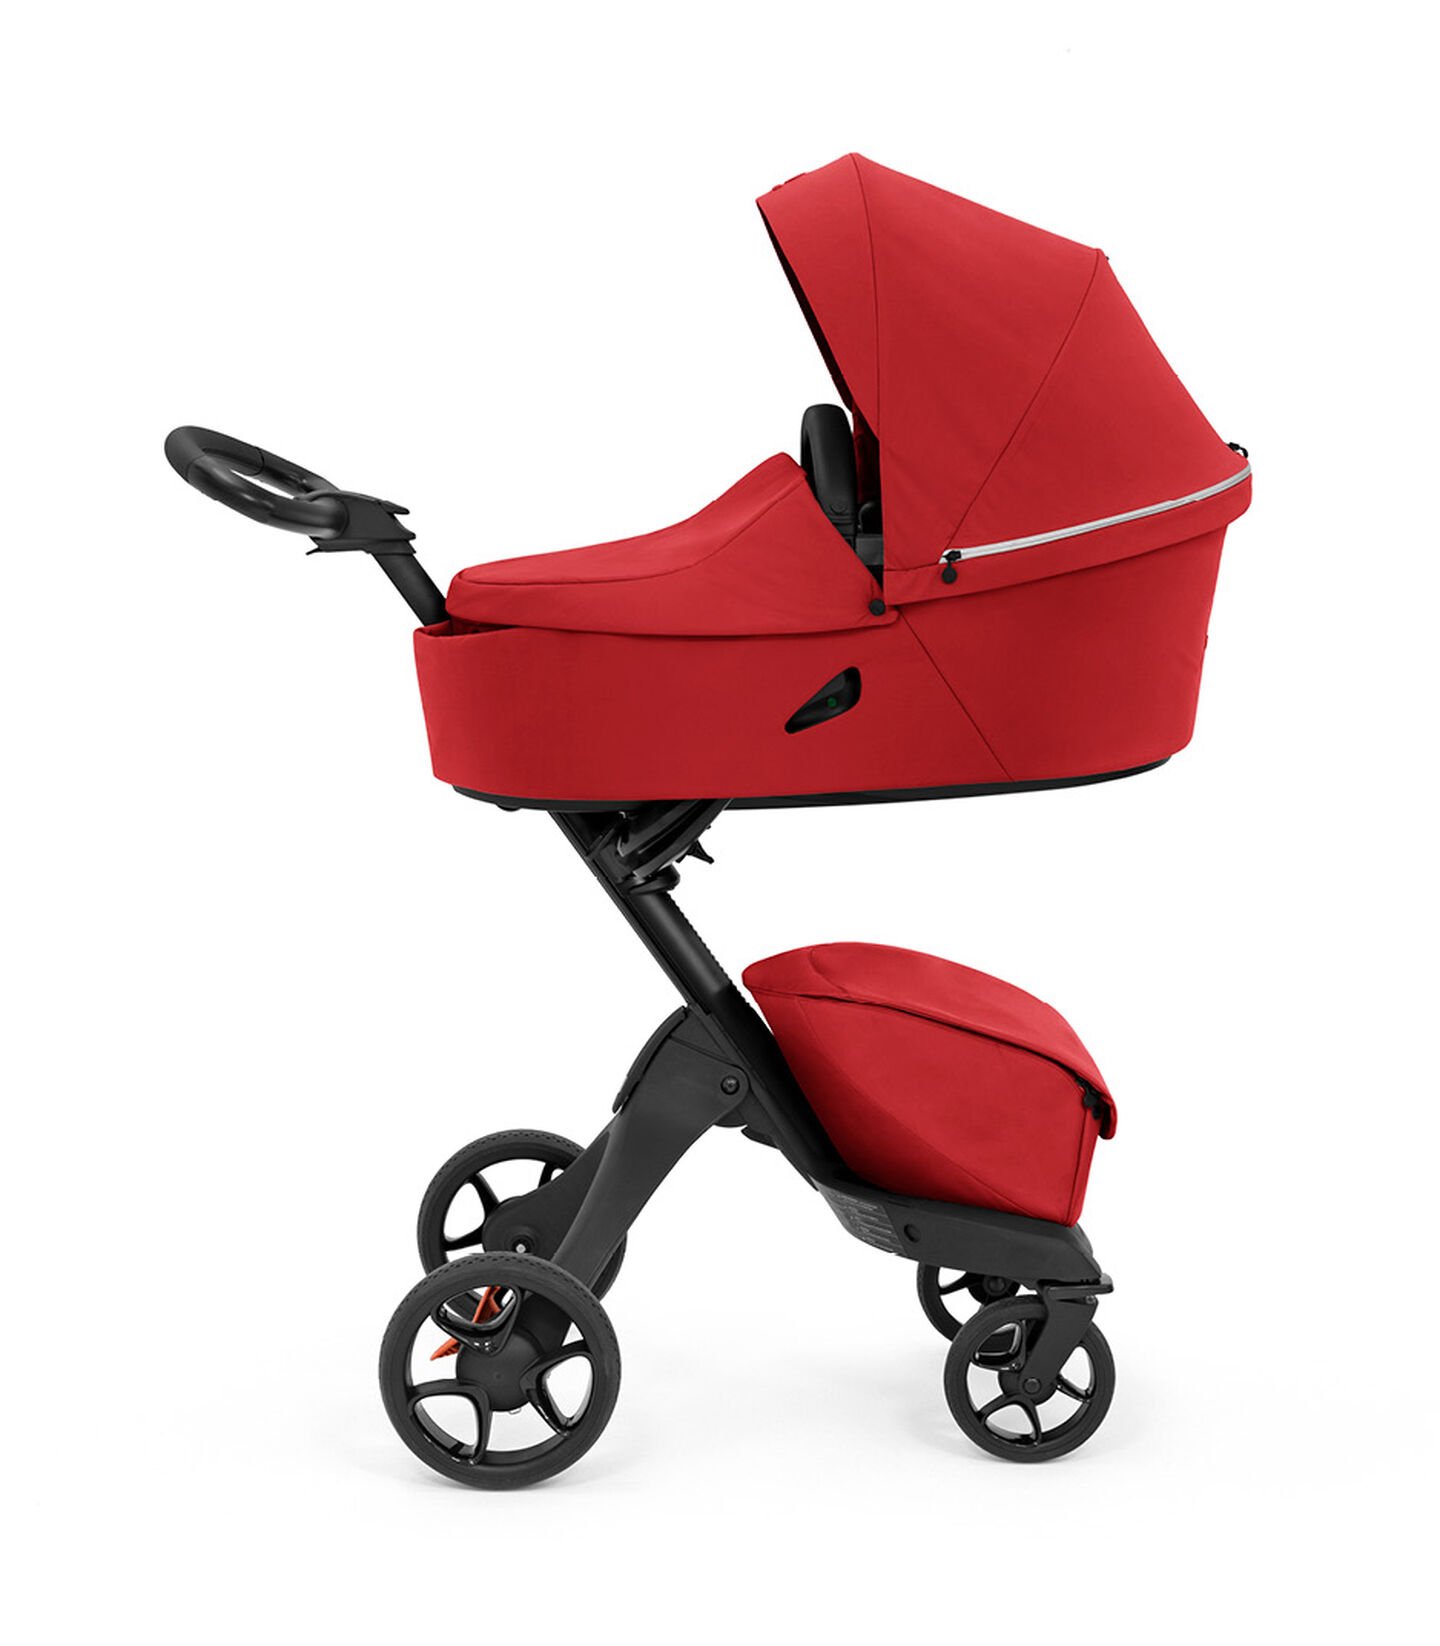 Stokke® Xplory® X reiswieg Ruby Red, Ruby Red, mainview view 2